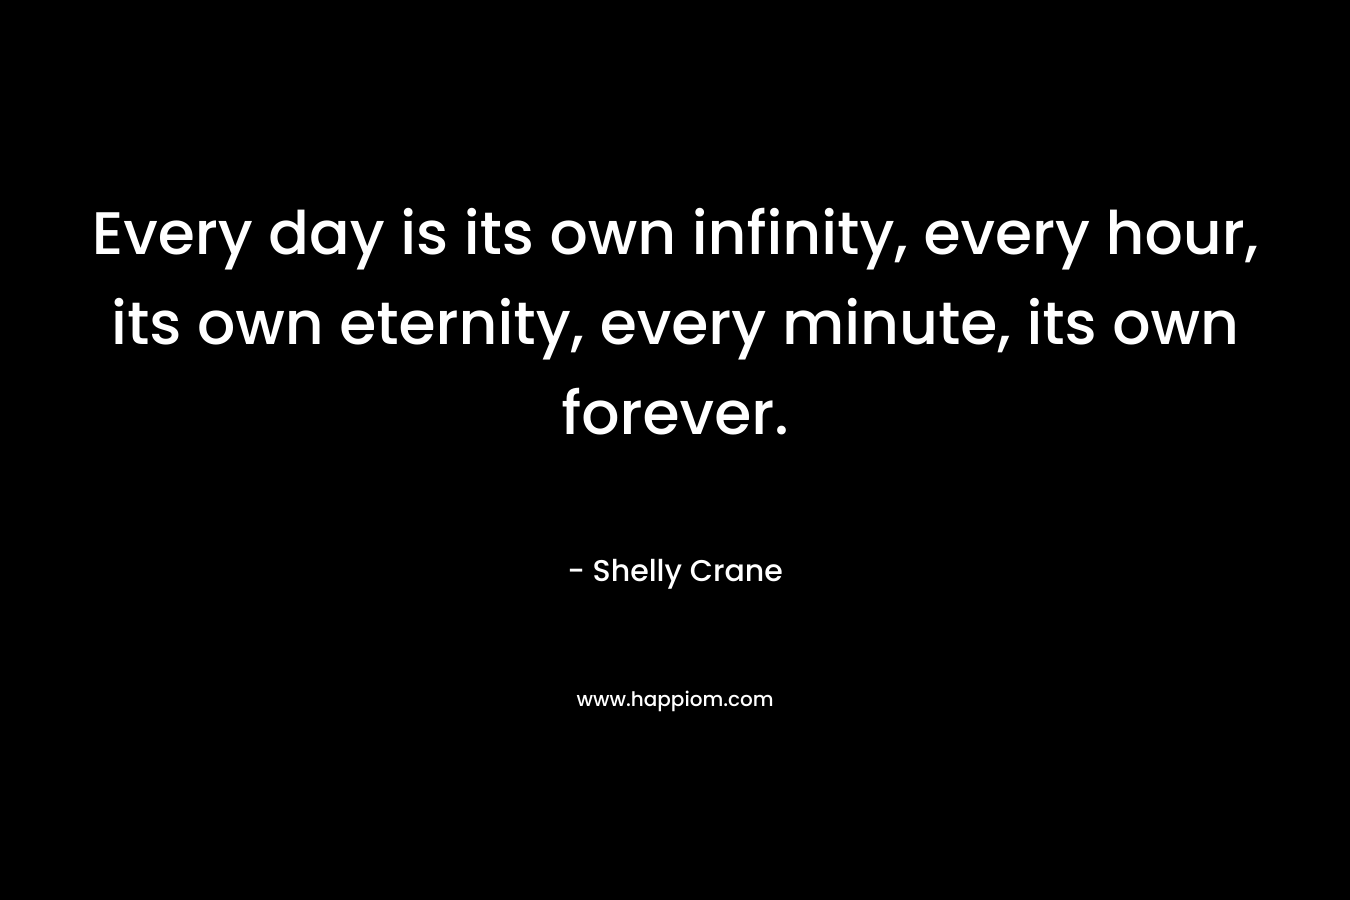 Every day is its own infinity, every hour, its own eternity, every minute, its own forever. – Shelly Crane